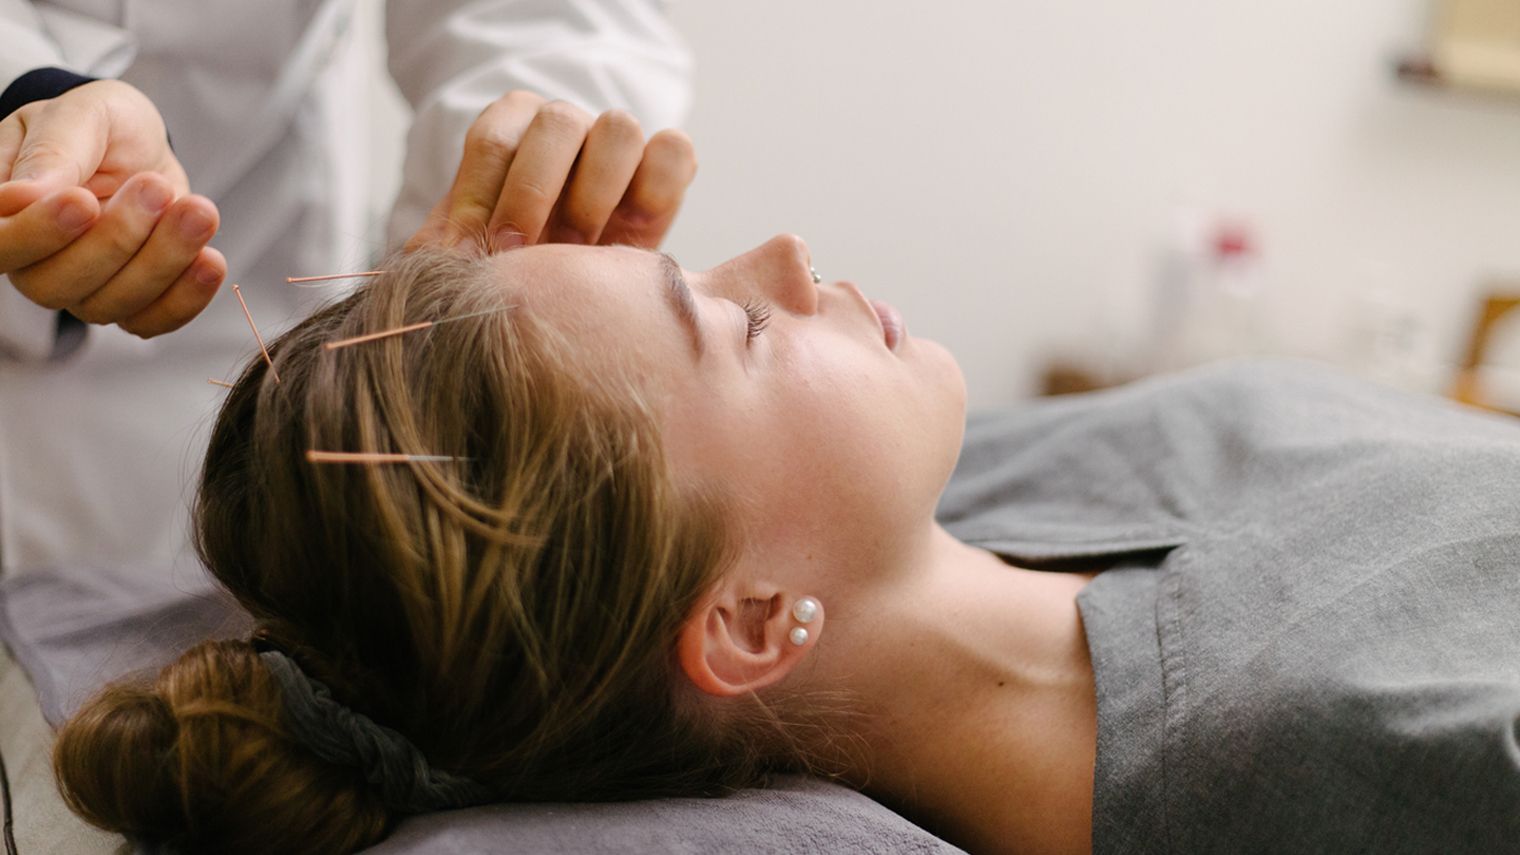 Can Acupuncture and Acupressure Help with Migraine Symptoms?